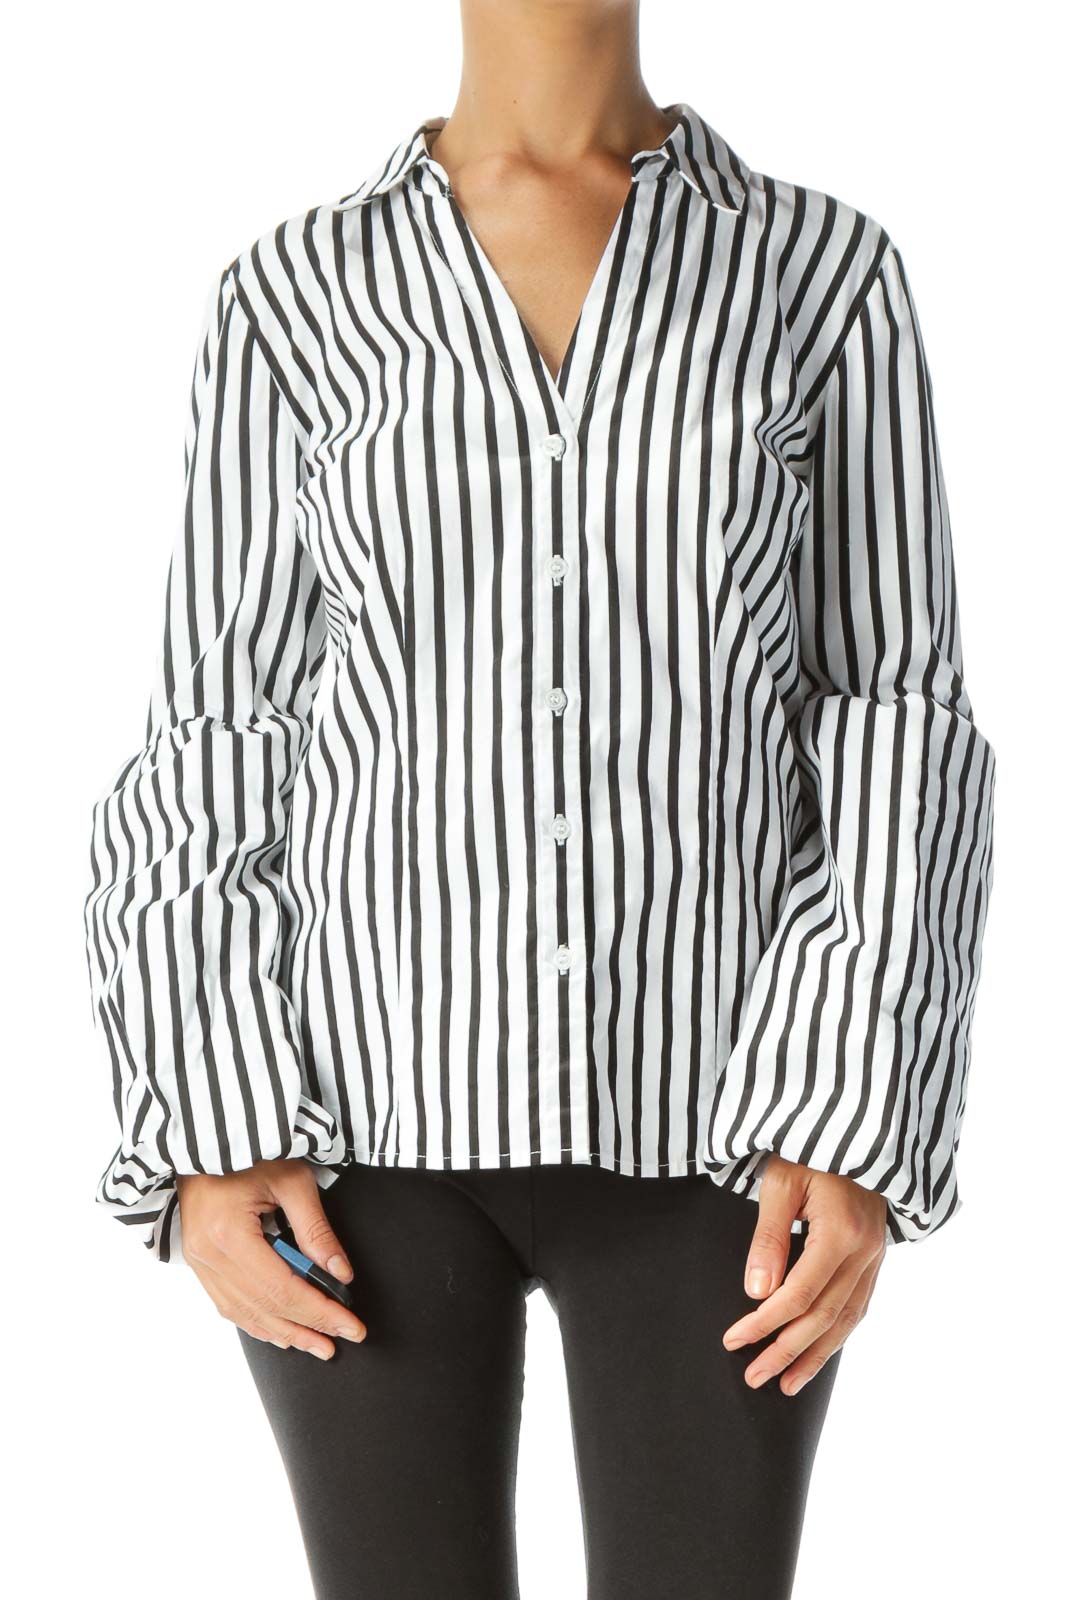 White Black Striped Shirt with Sleeve Detail Front